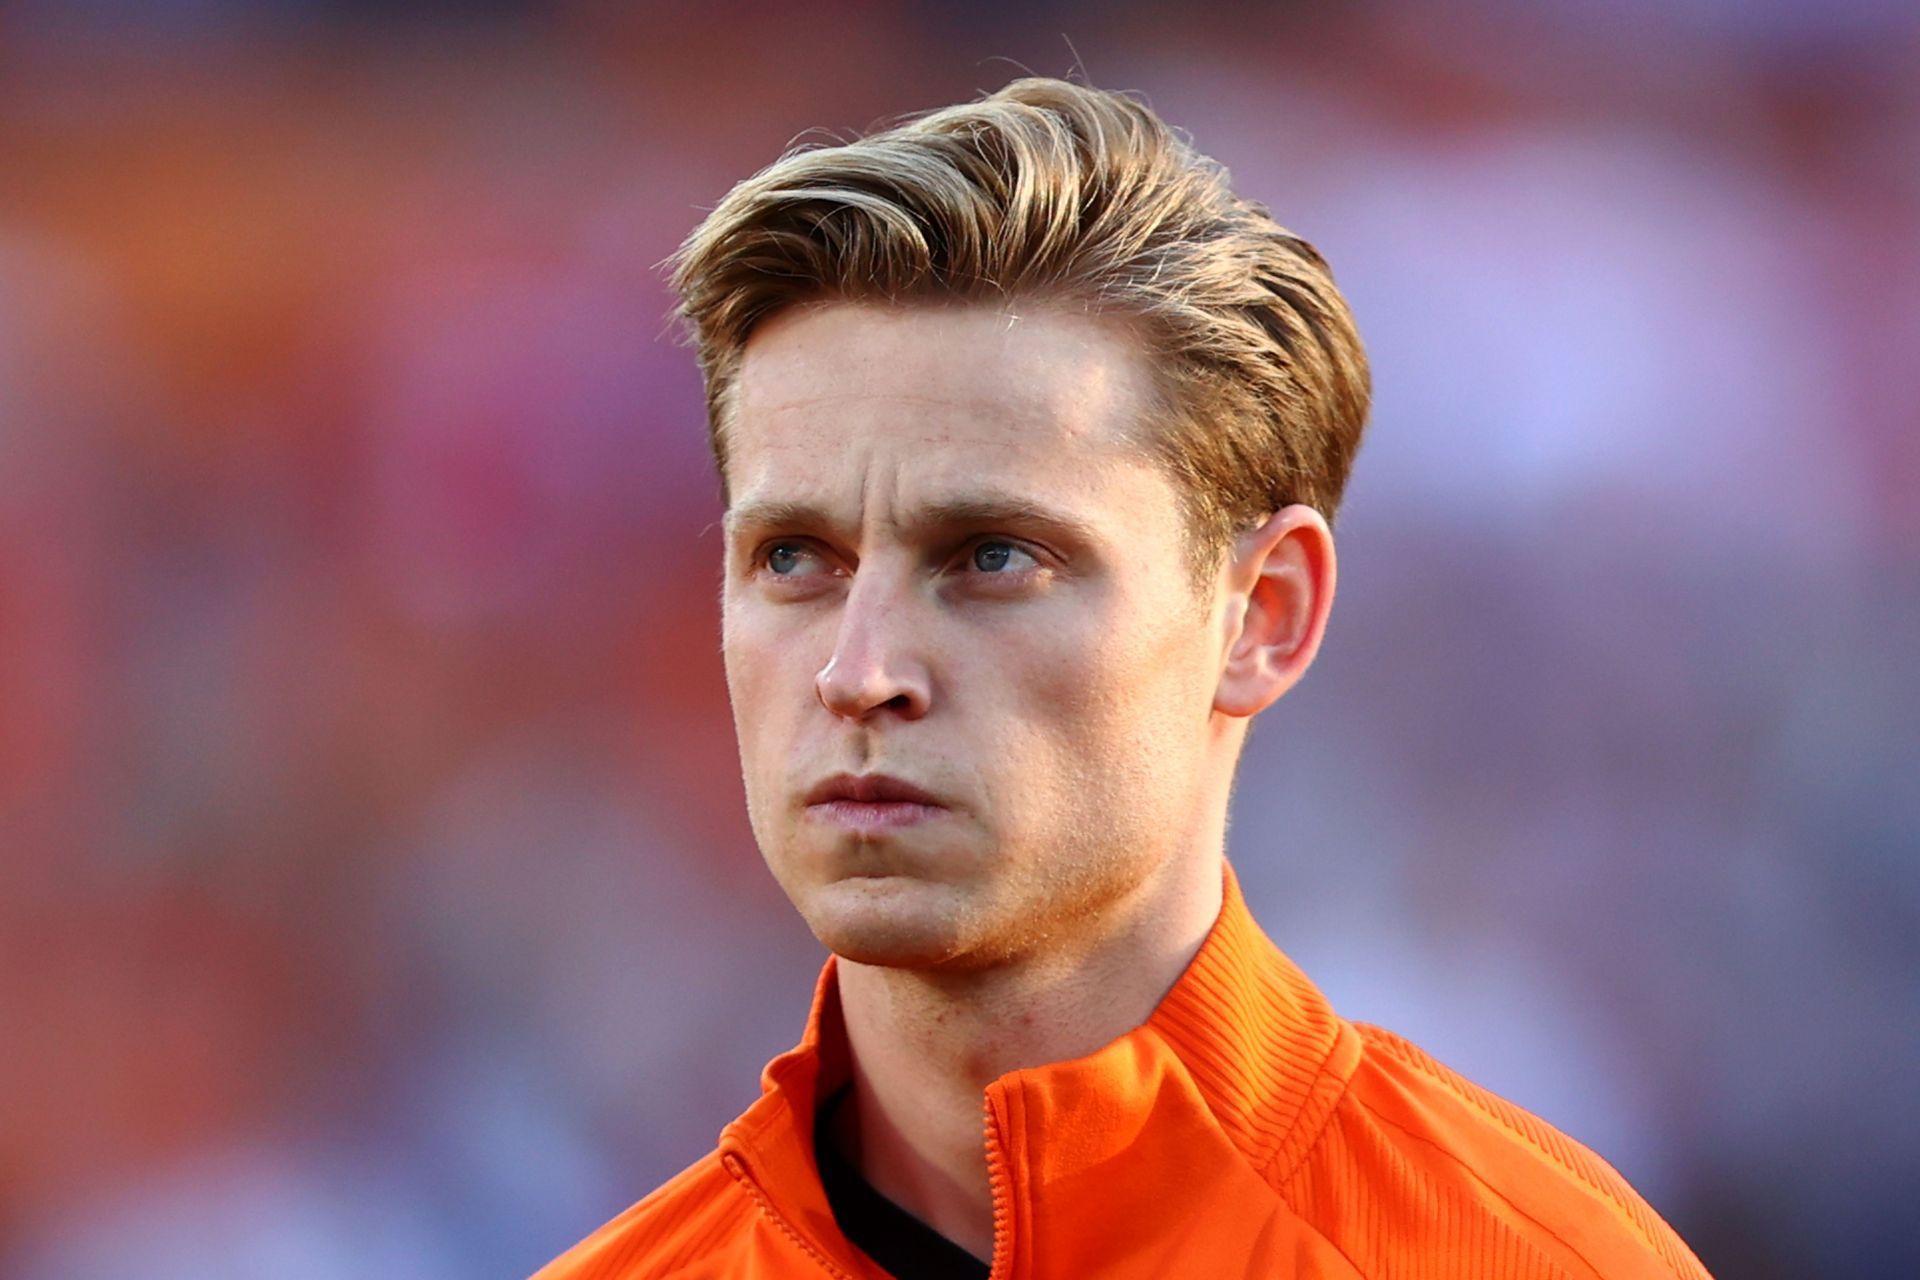 Frenkie de Jong is no closer to arriving at Old Trafford.